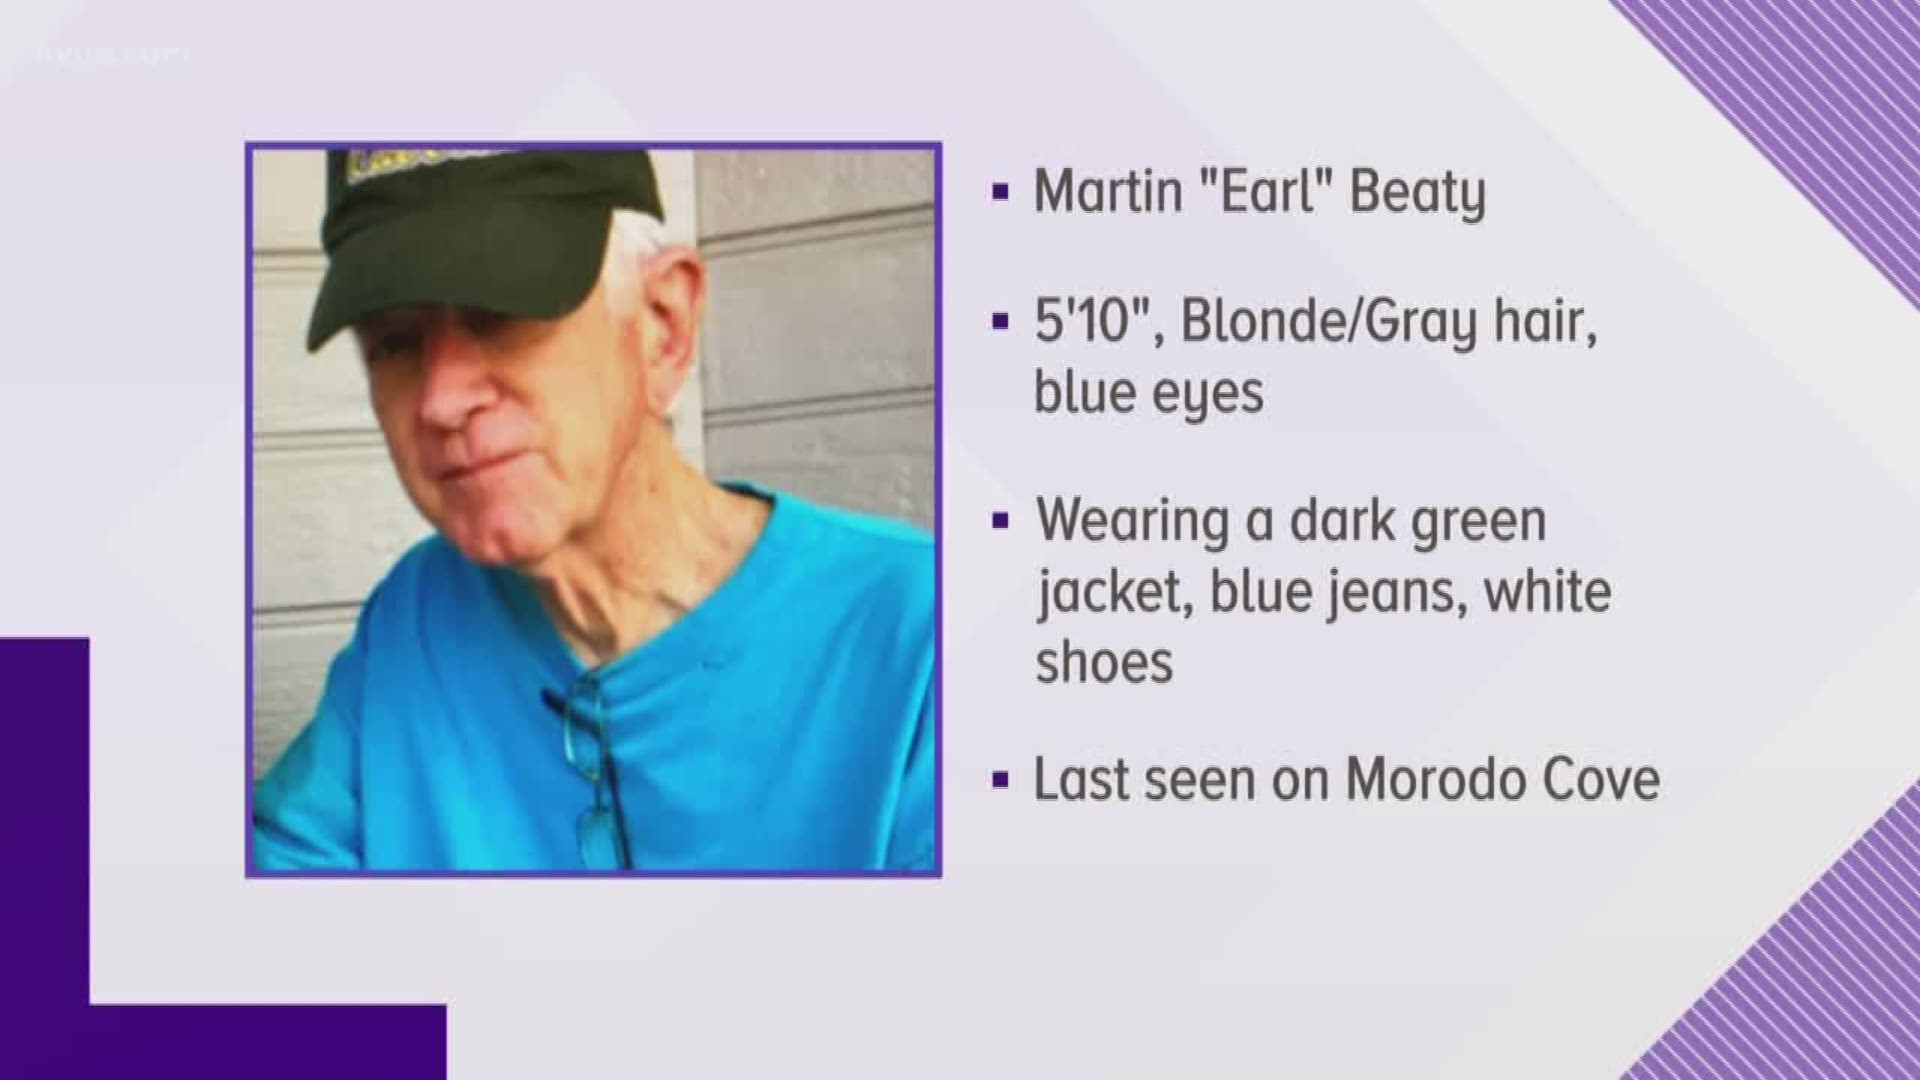 Martin "Earl" Beaty was last seen leaving his home on Morado Cover near 360 and 183.